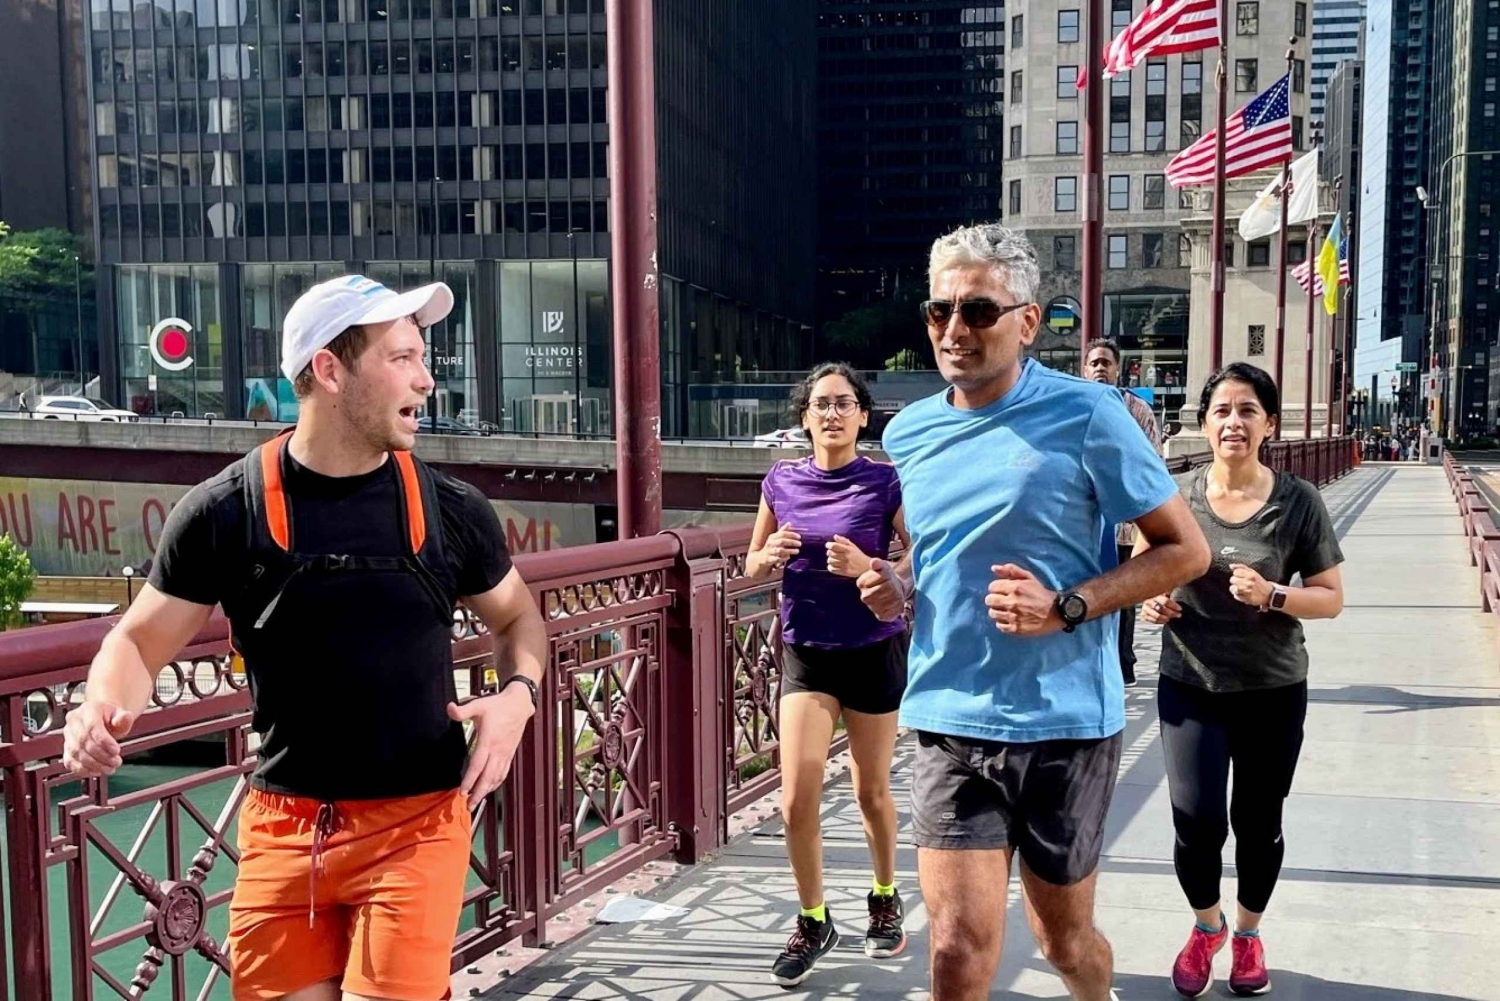 Chicago: Downtown Highlights Running Tour